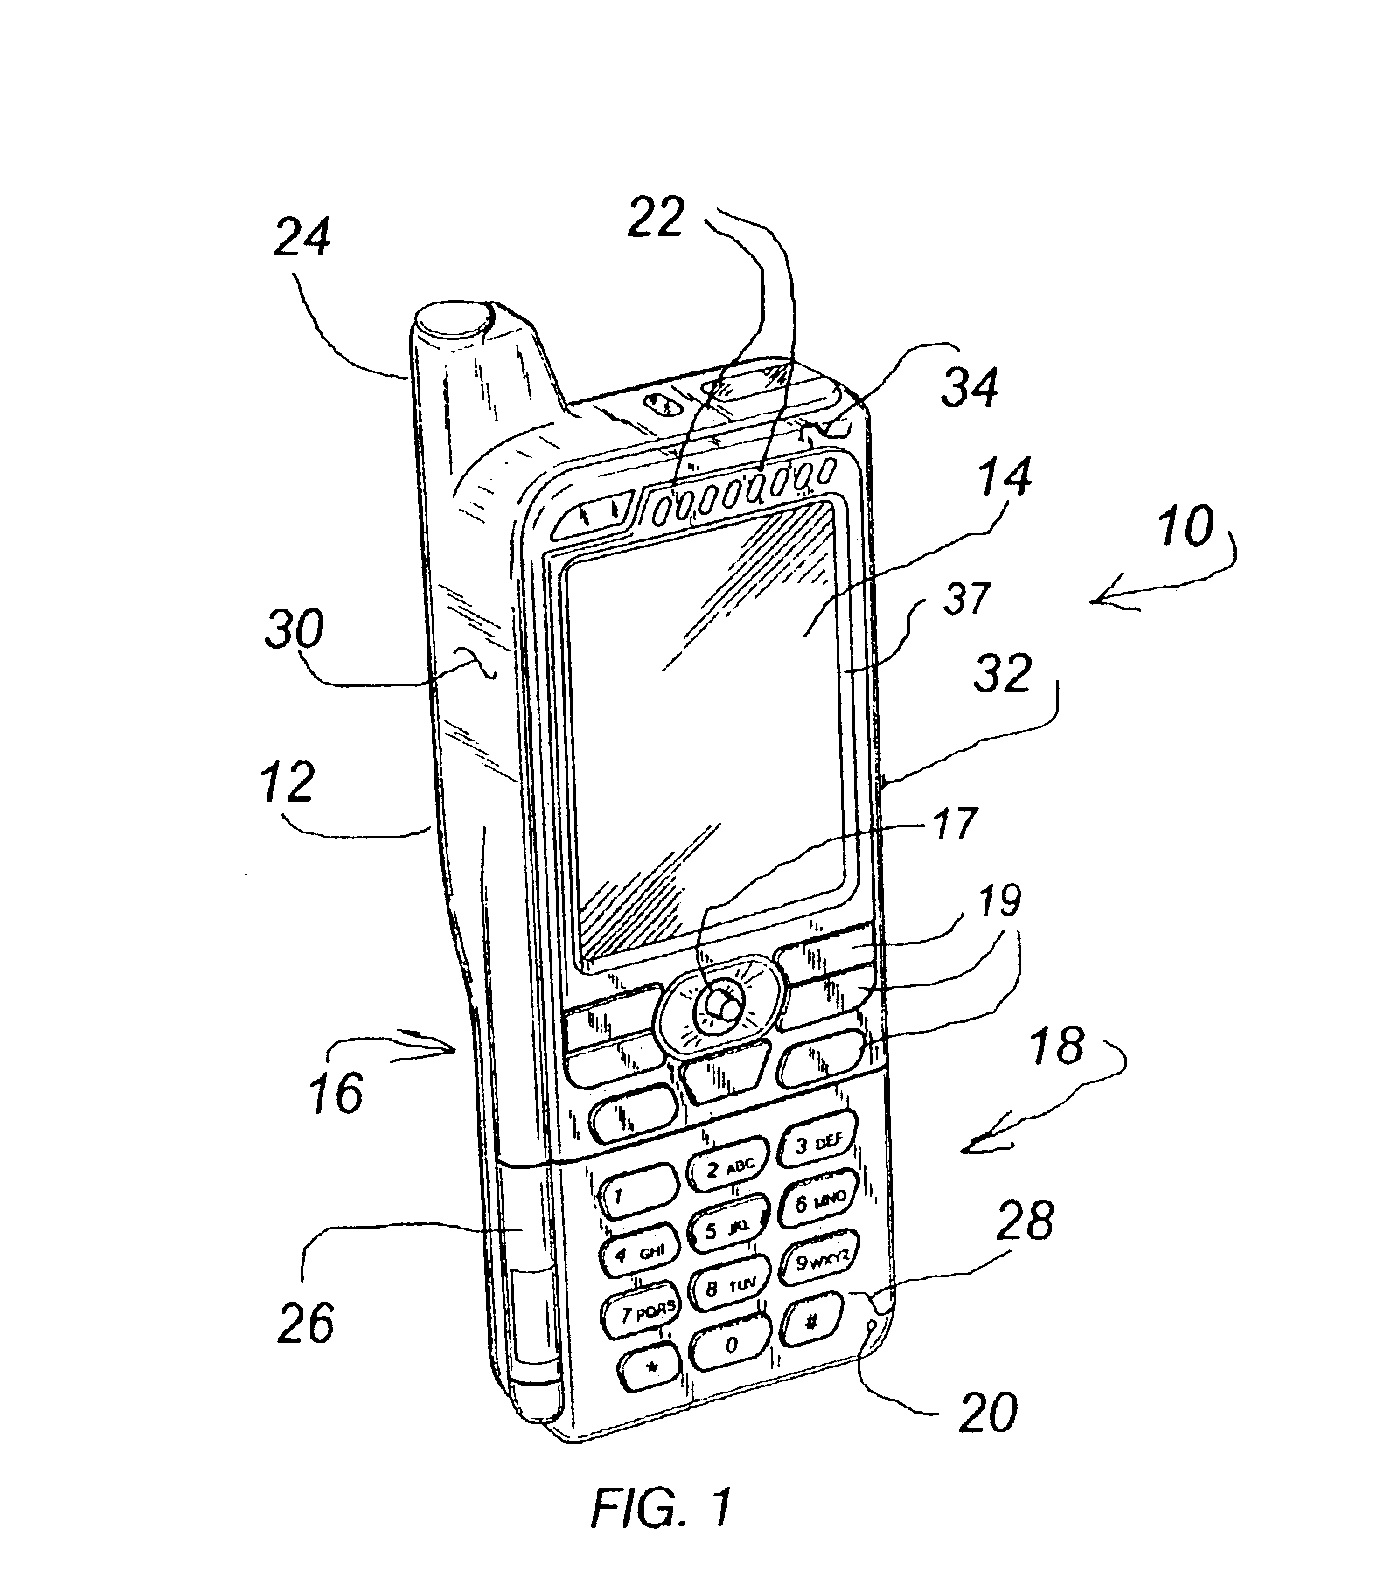 Mobile electronic device